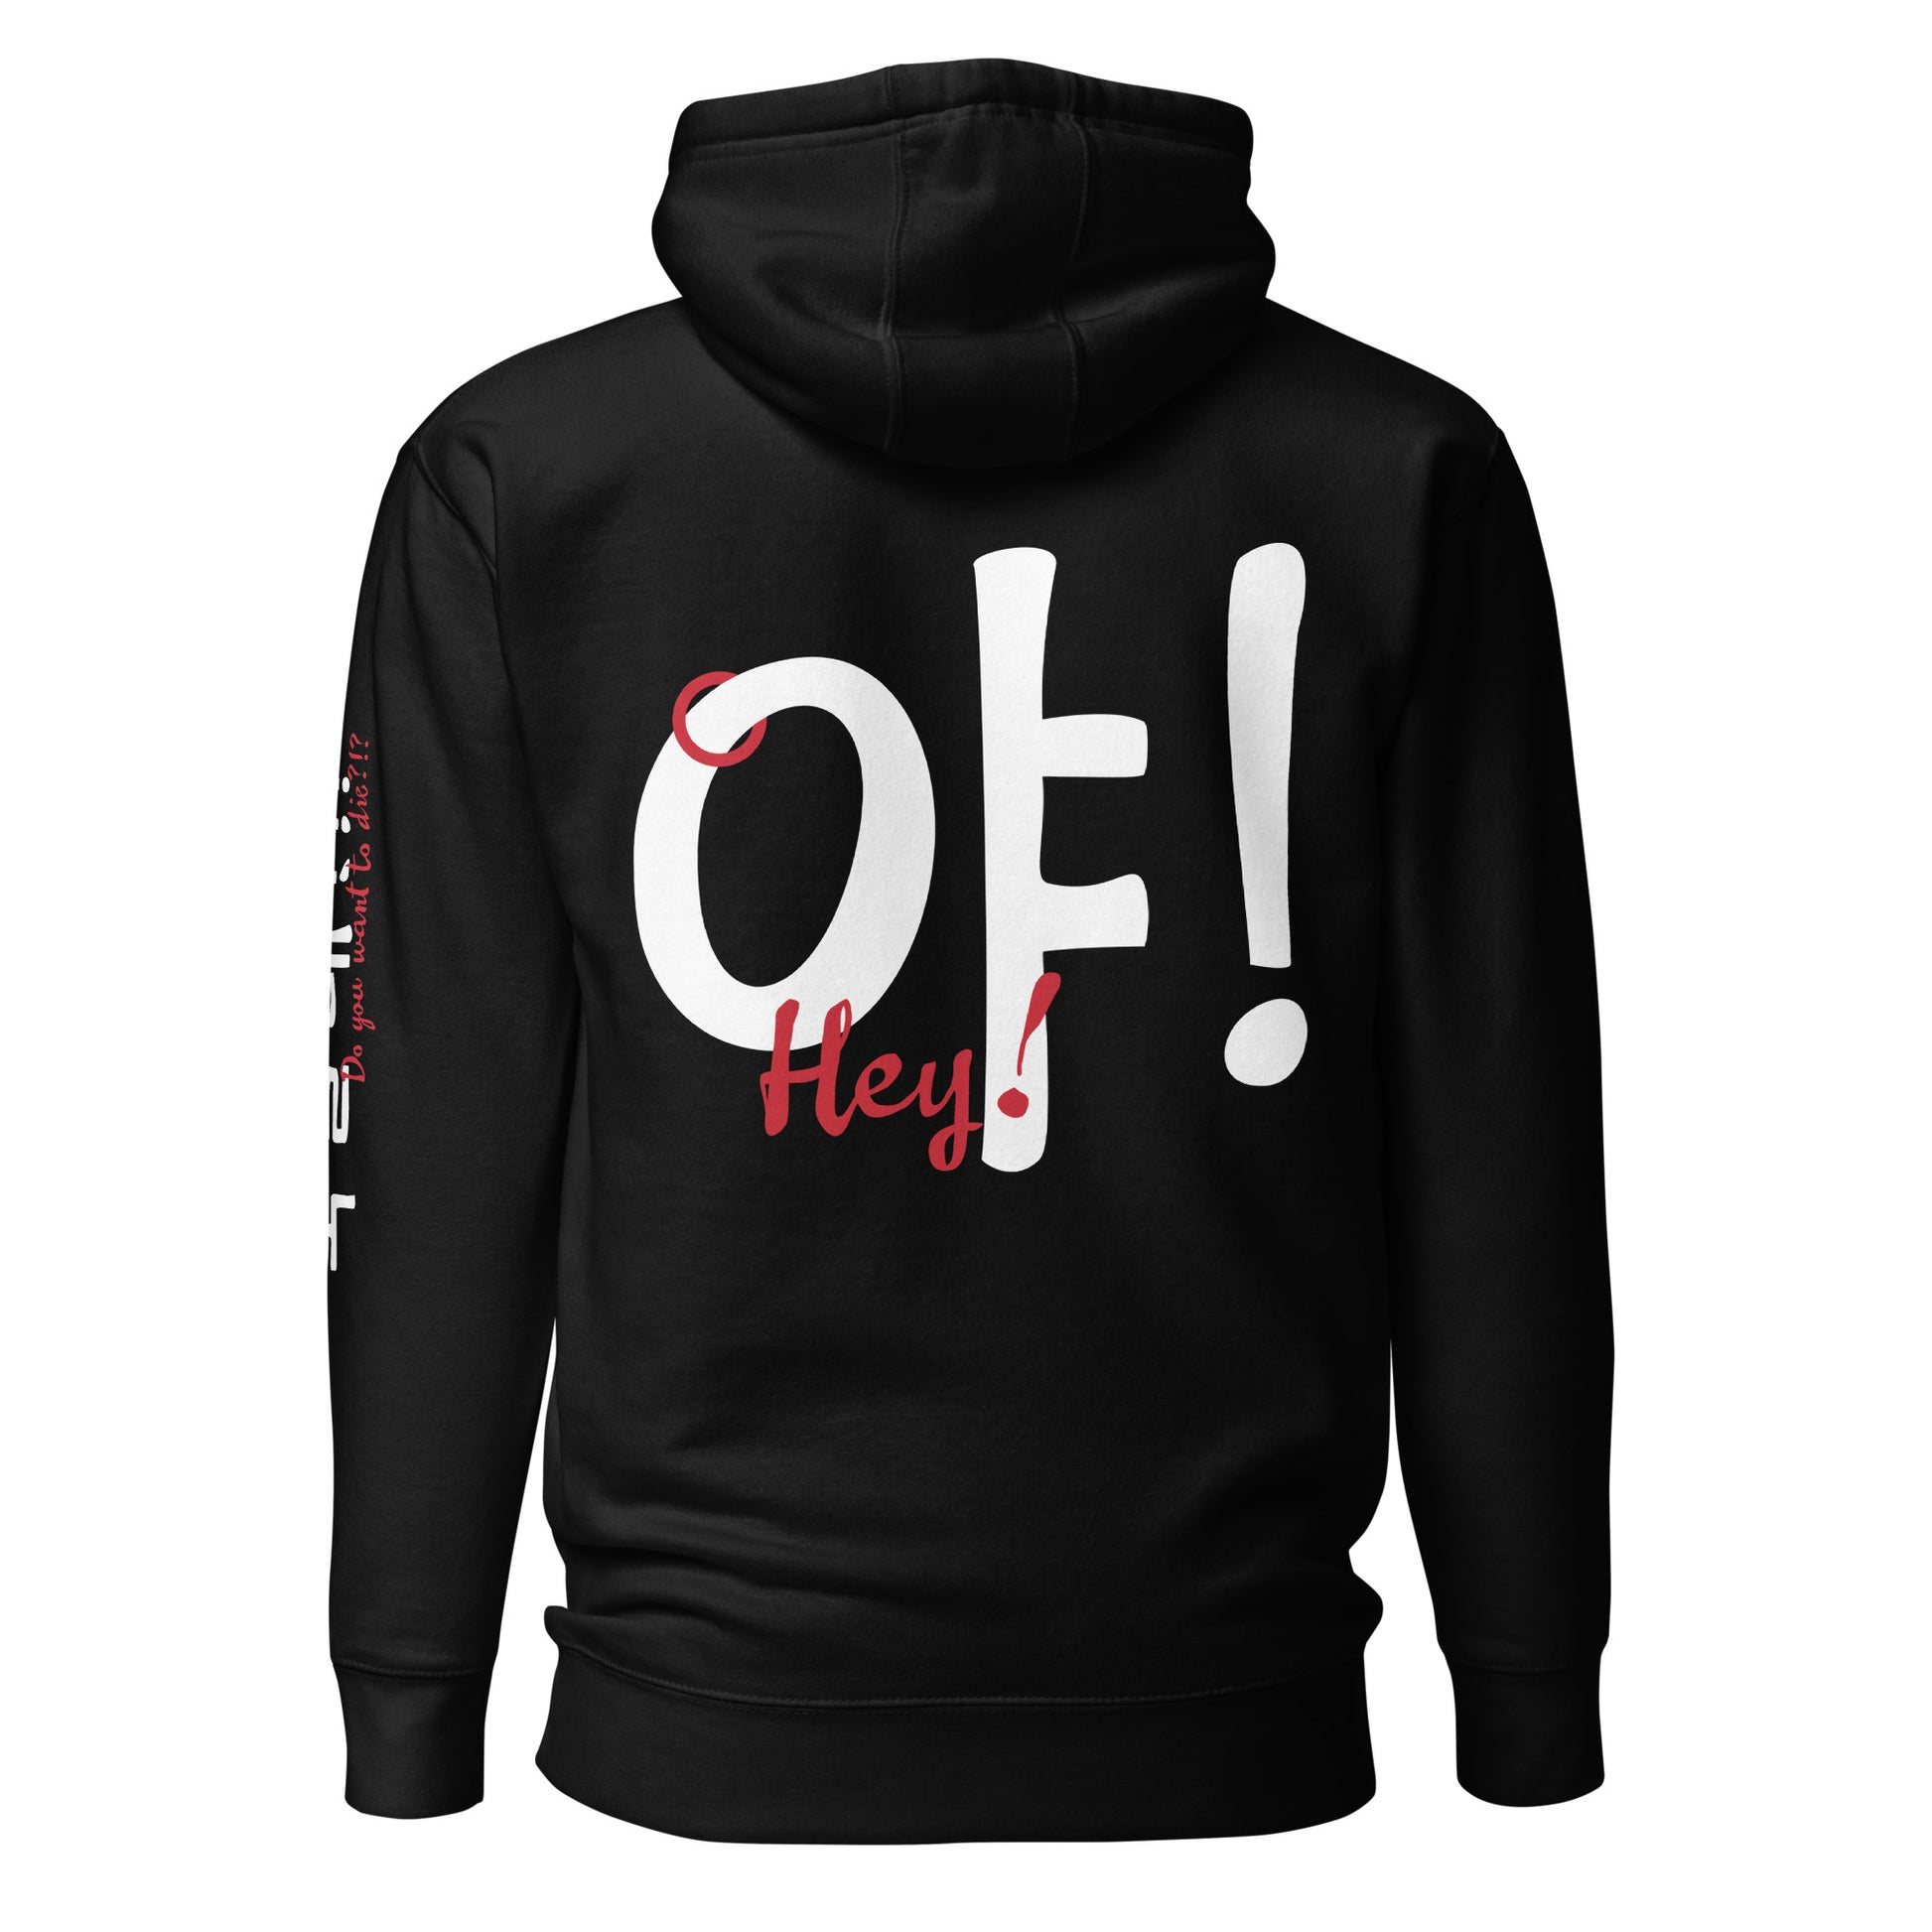 Black premium hoodie with a large print of the phrase 'Hey!' in Hangul and English